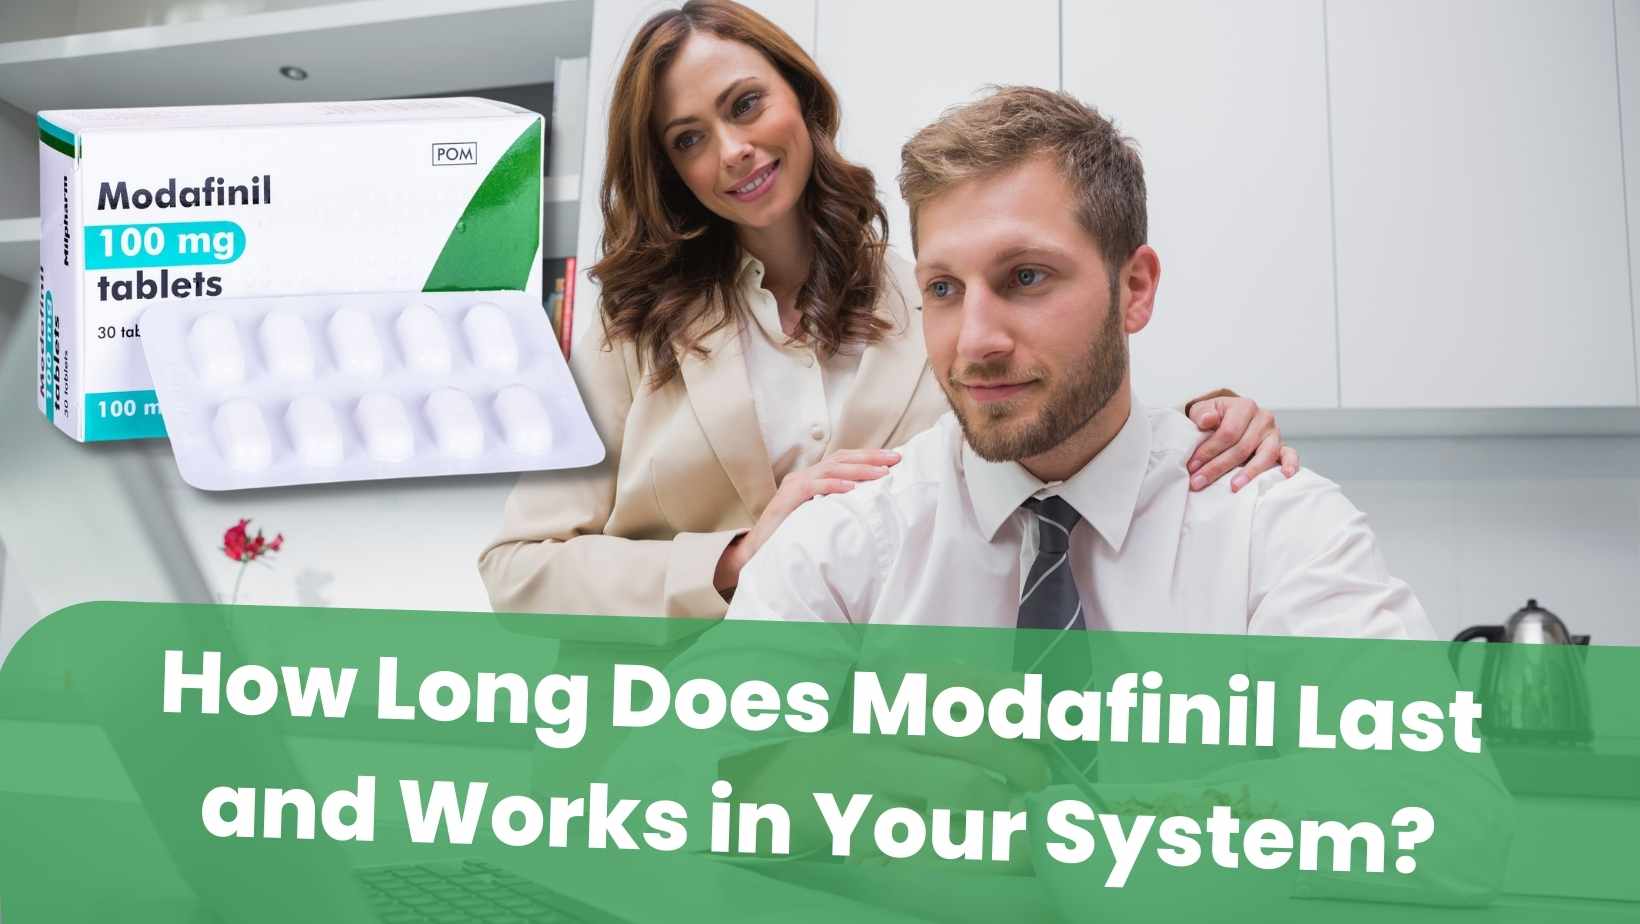 How Long Does Modafinil Last and Works in Your System?